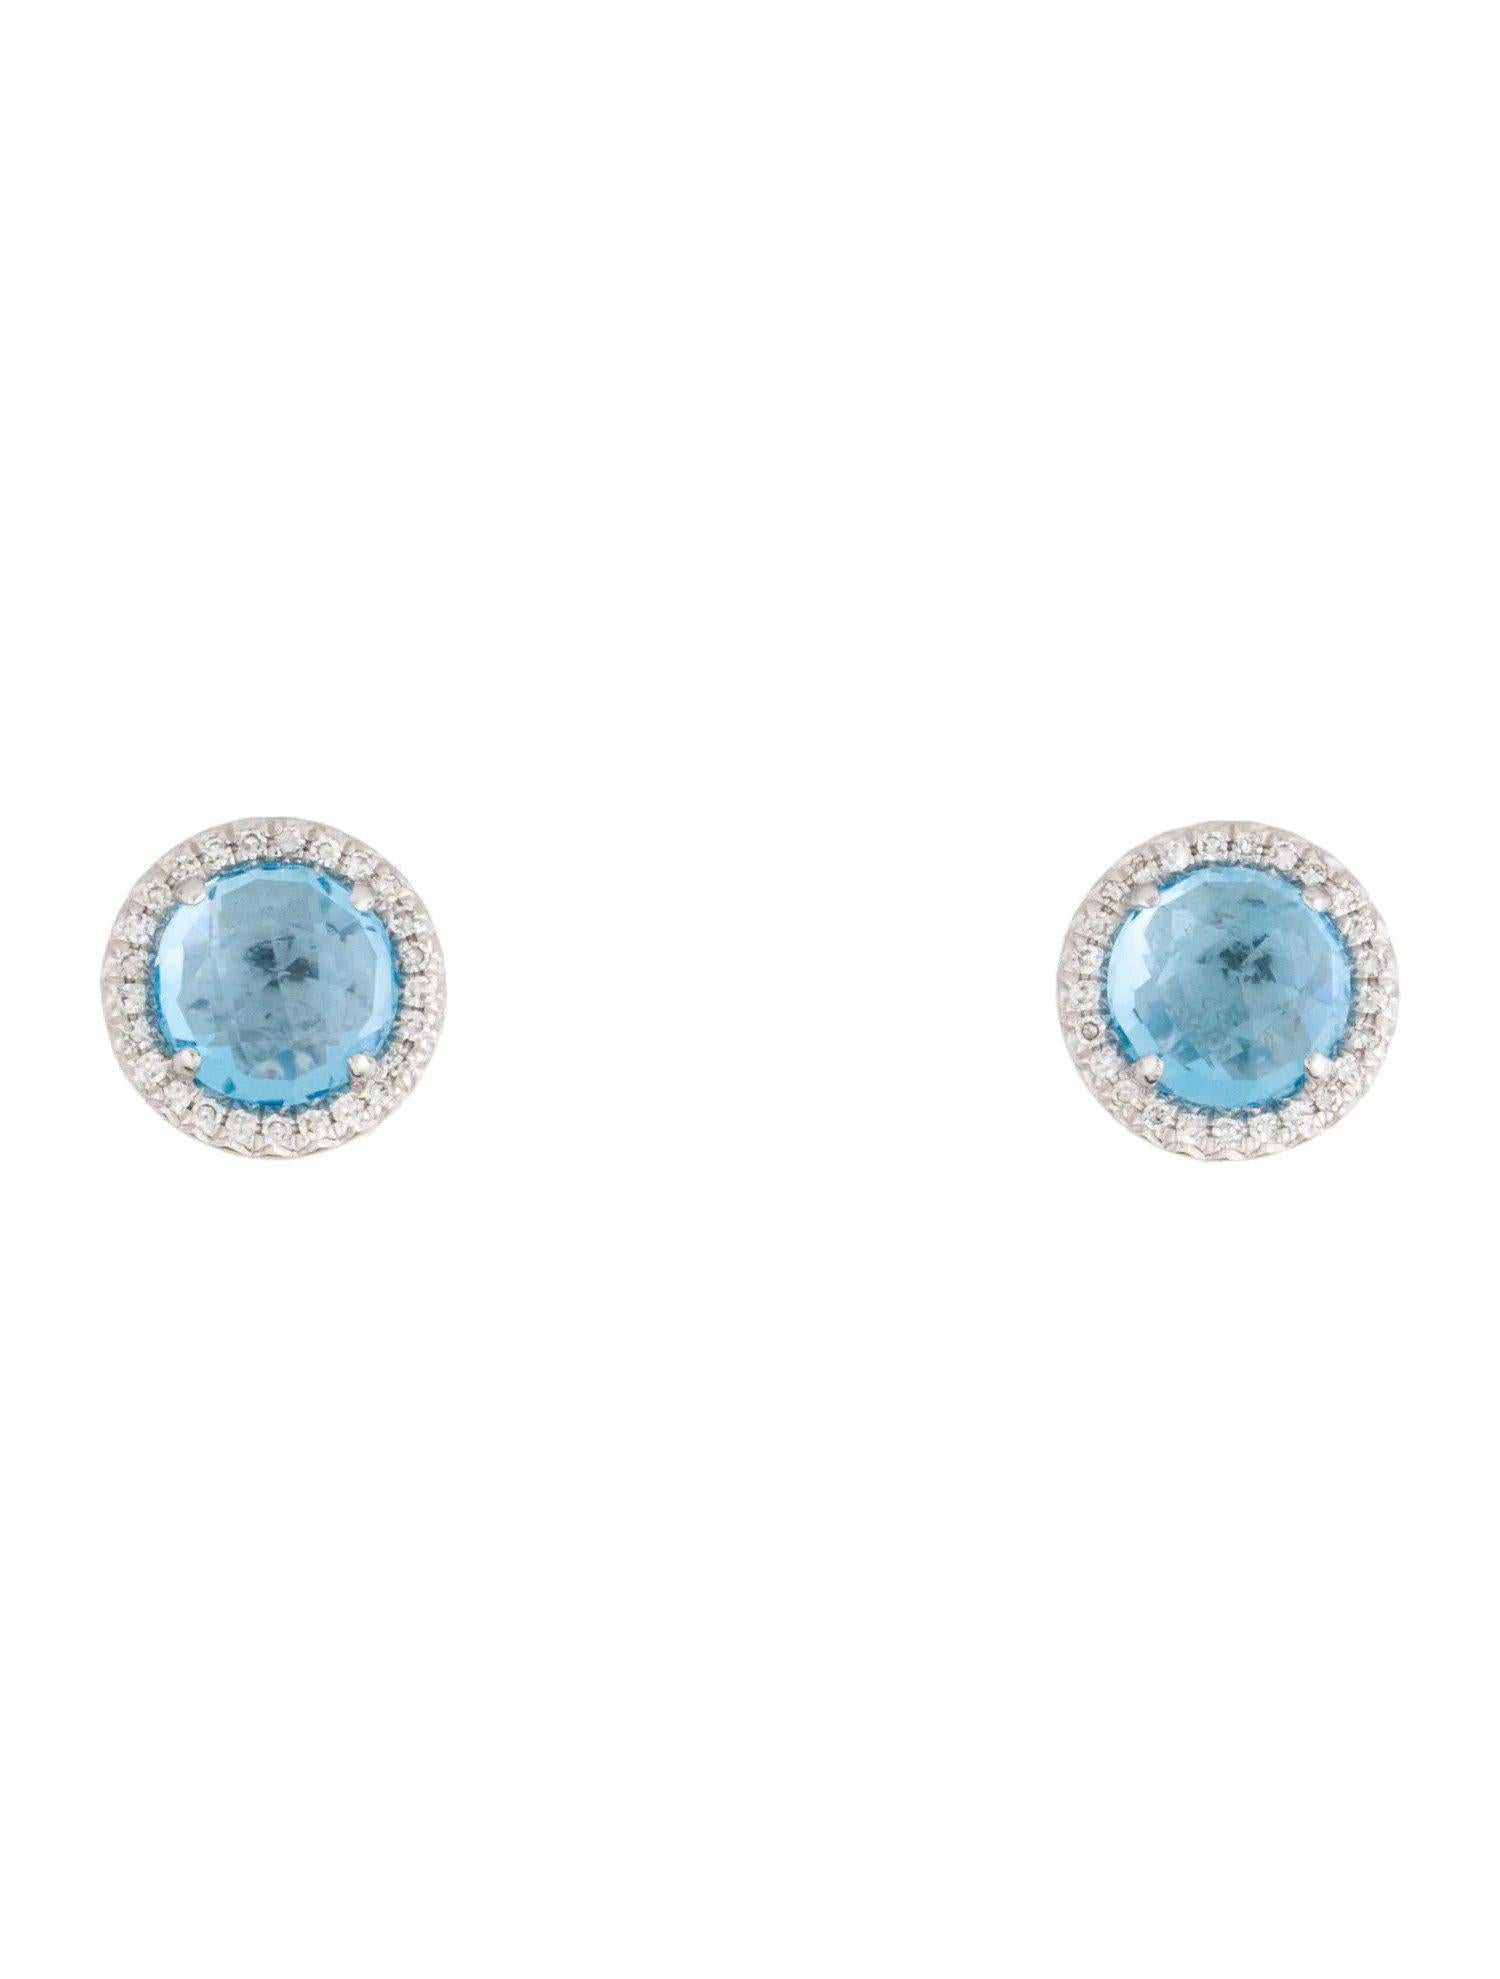 These Swiss Blue Topaz & Diamond Earrings are a stunning and timeless accessory that can add a touch of glamour and sophistication to any outfit. 

These earrings each feature a 1.20 Carat Round Swiss Blue Topaz, with a Diamond Halo comprised of